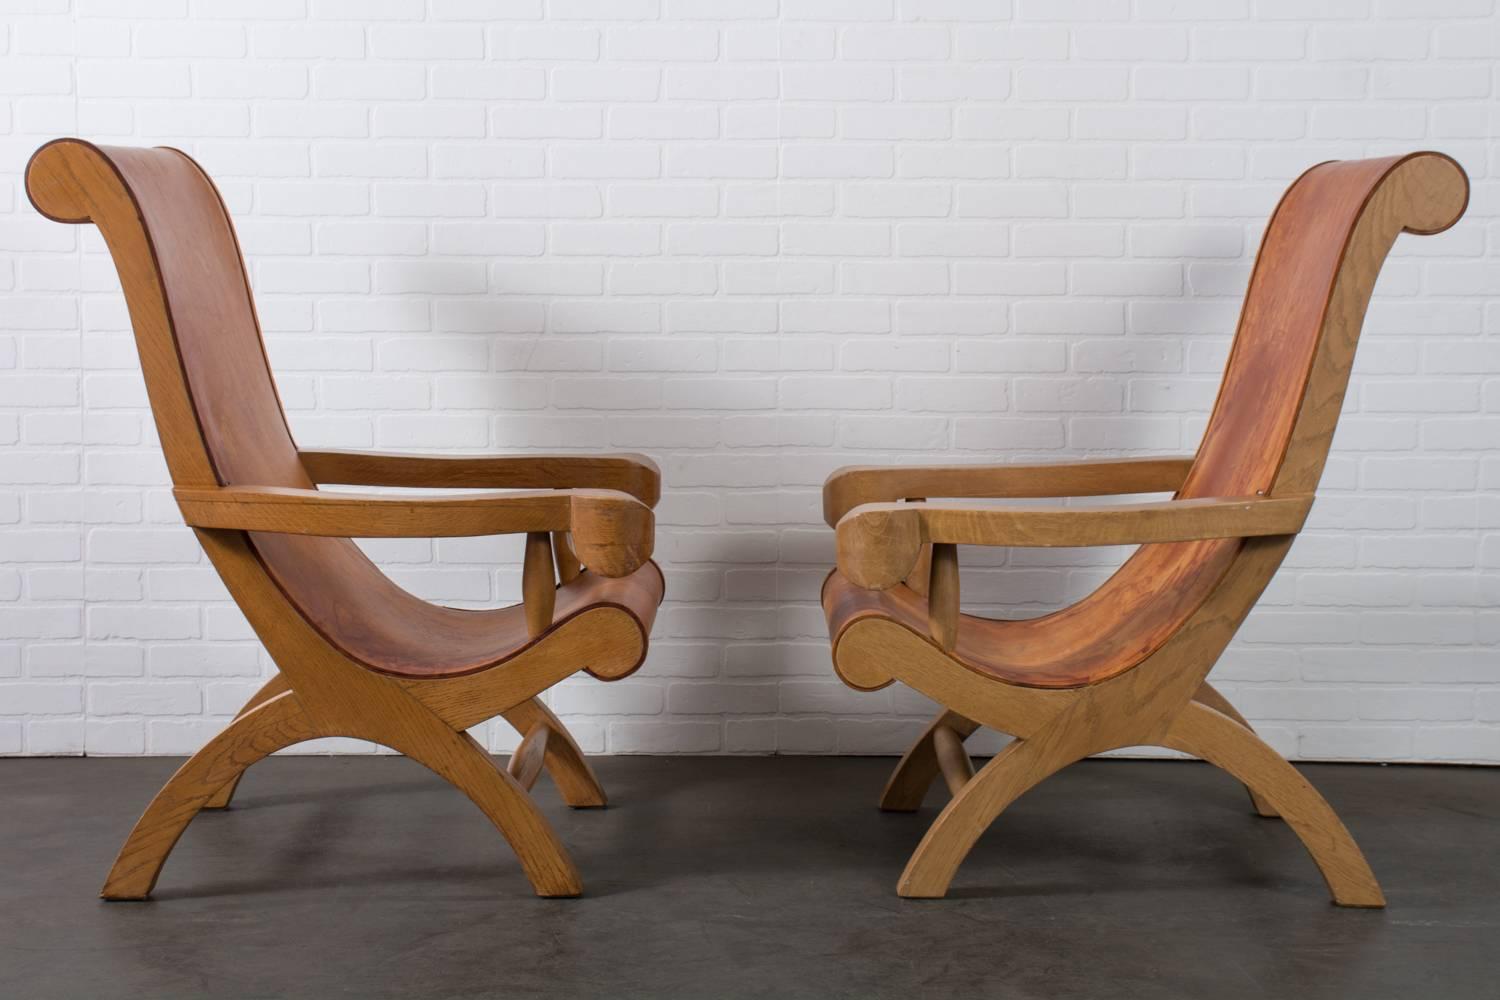 These vintage midcentury butaque (or butaca) chairs are attributed to Cuban designer, Clara Porset, Mexico City, 1940's. Many well-known Mexican architects, such as Luis Barragán, used Clara Porset's version of the butaque chair in their interiors.